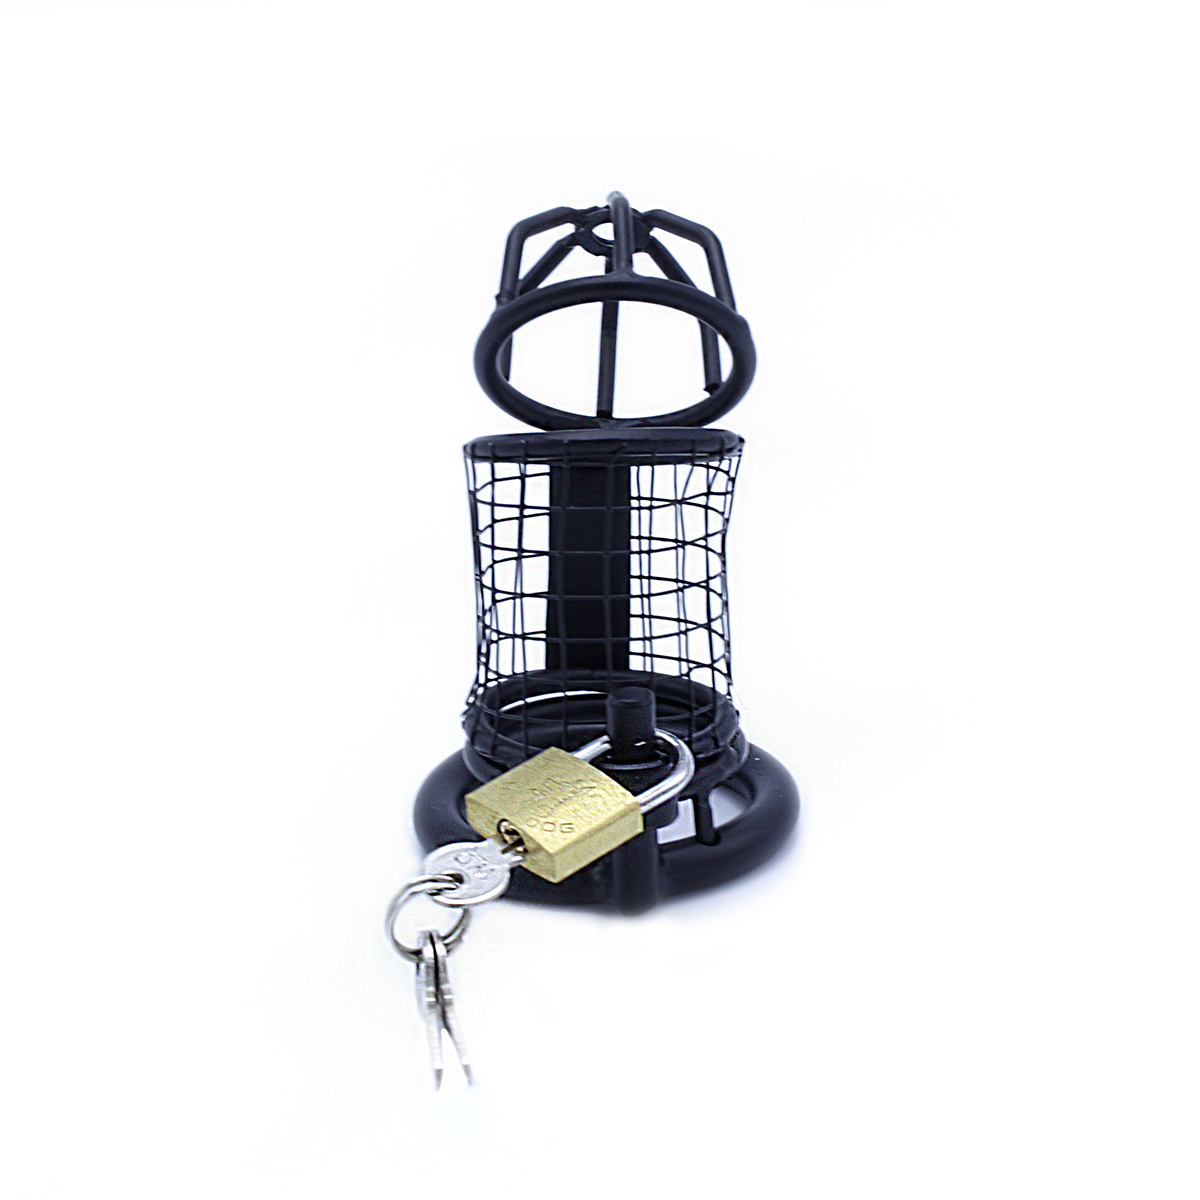 Chastity-Cage-Squares-Black-OPR-3010096-2